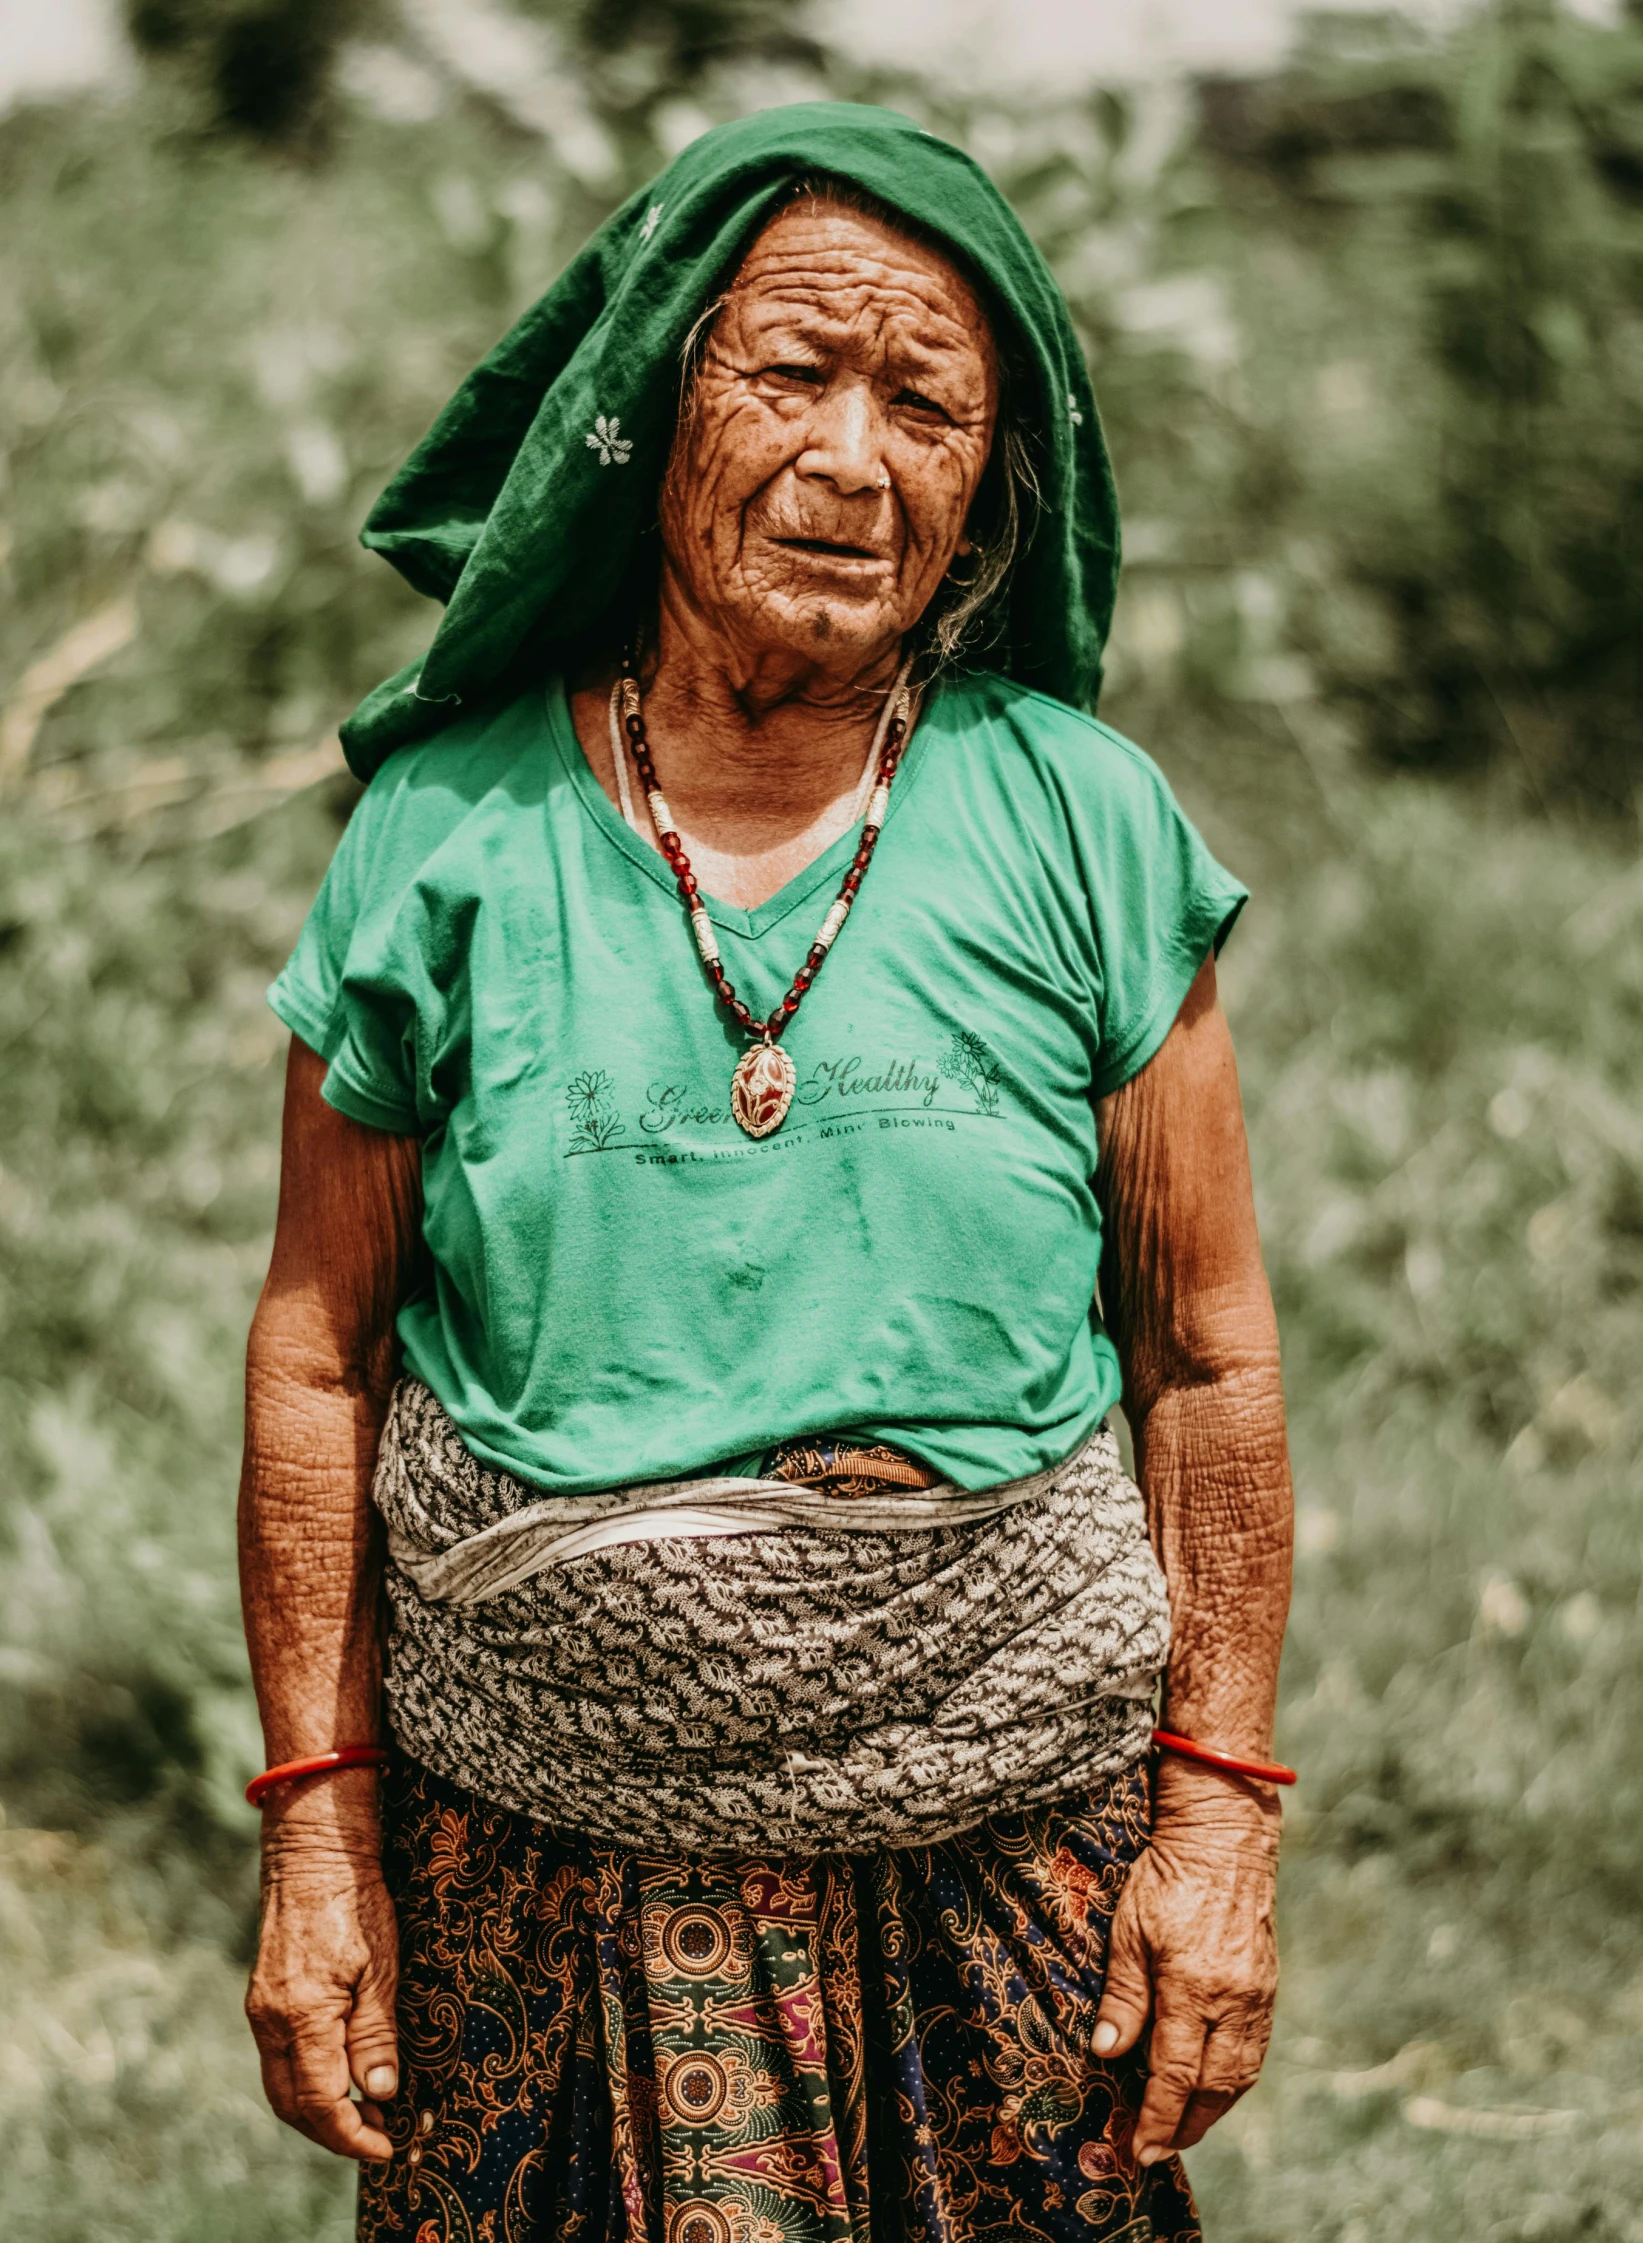 an elderly woman with green clothes, smiling, carrying a rope